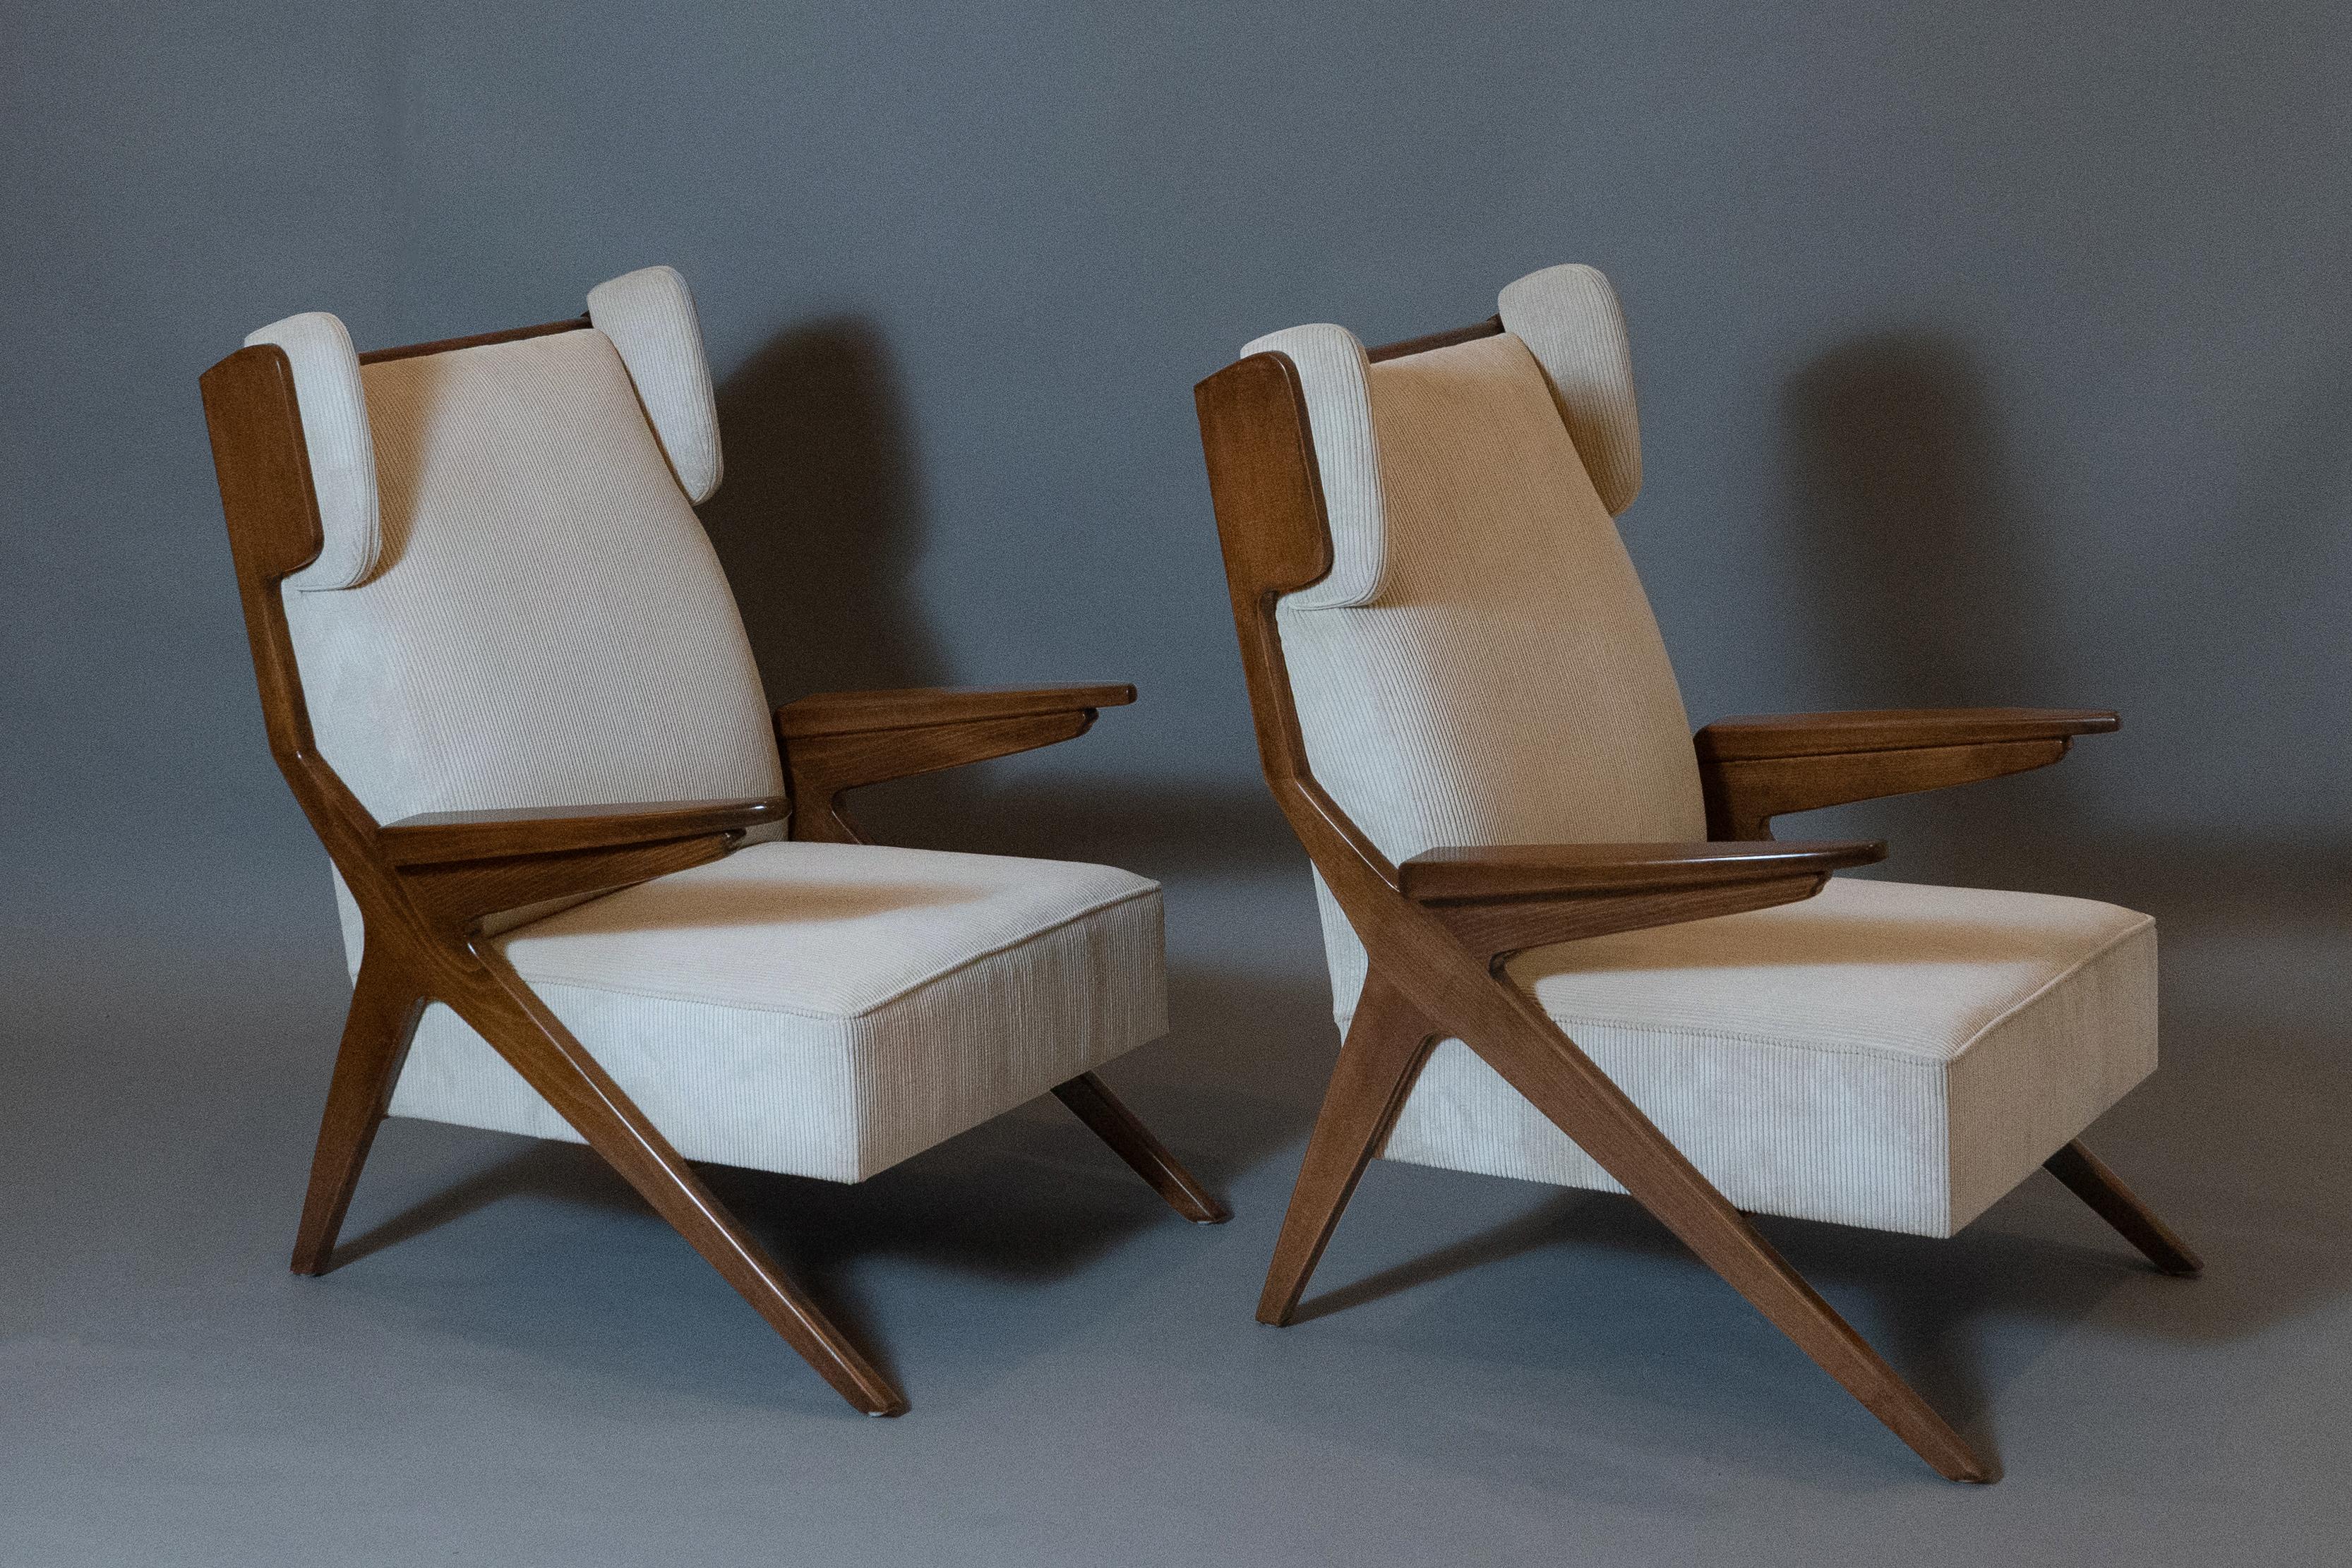 Augusto Romano (1918 - 2001) 

An imposing pair of Papa Bear wingback armchairs with scissor legs, in walnut and cream upholstery, by Torinese modernist architect Augusto Romano. The chairs' compass legs, highly geometric in profile, angle at one